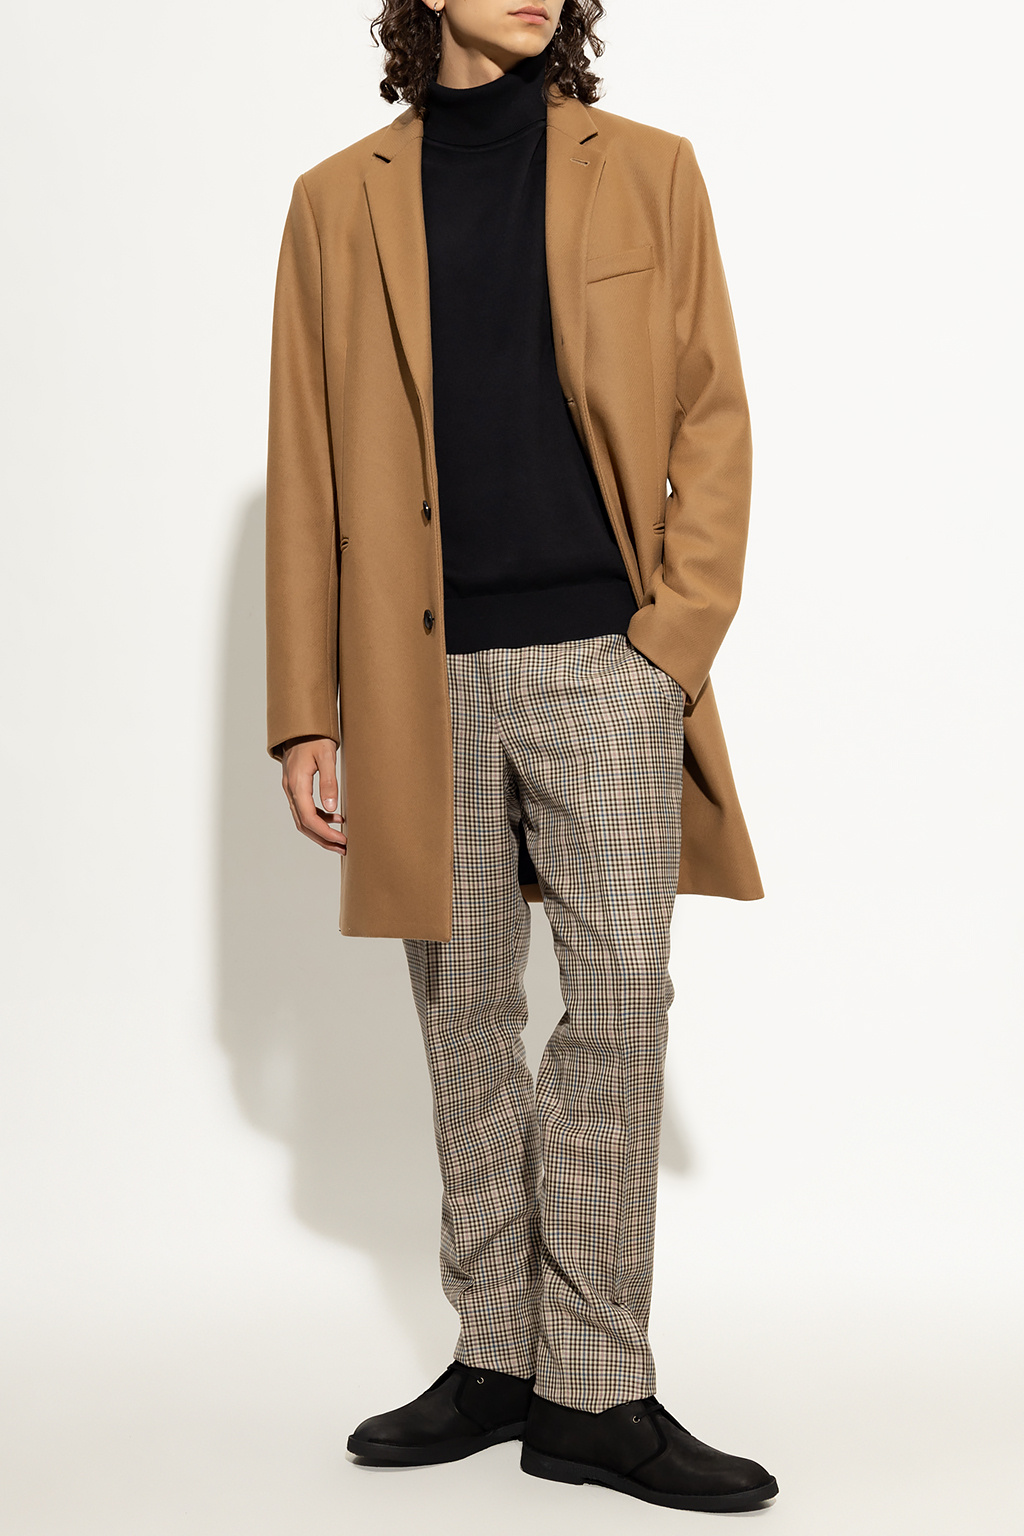 Paul Smith fringe check trousers 2015ss - sinesthesia.com.br